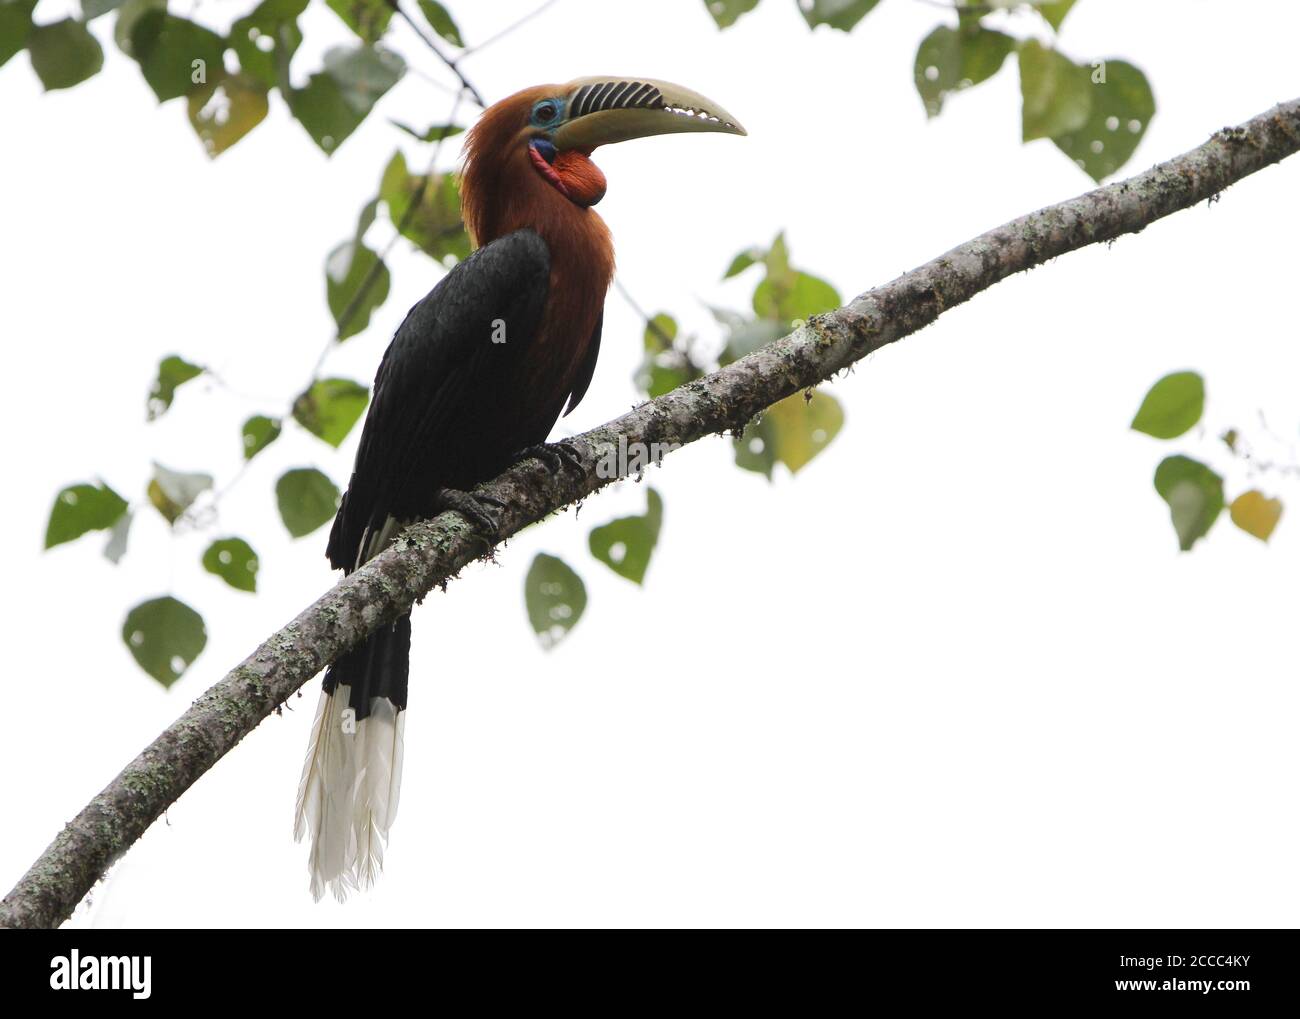 Rufous-necked Hornbill (Aceros nipalensis) in northeast India. A bird of ridged and hilly, chiefly broadleaved, forests in eastern Himalaya. Stock Photo